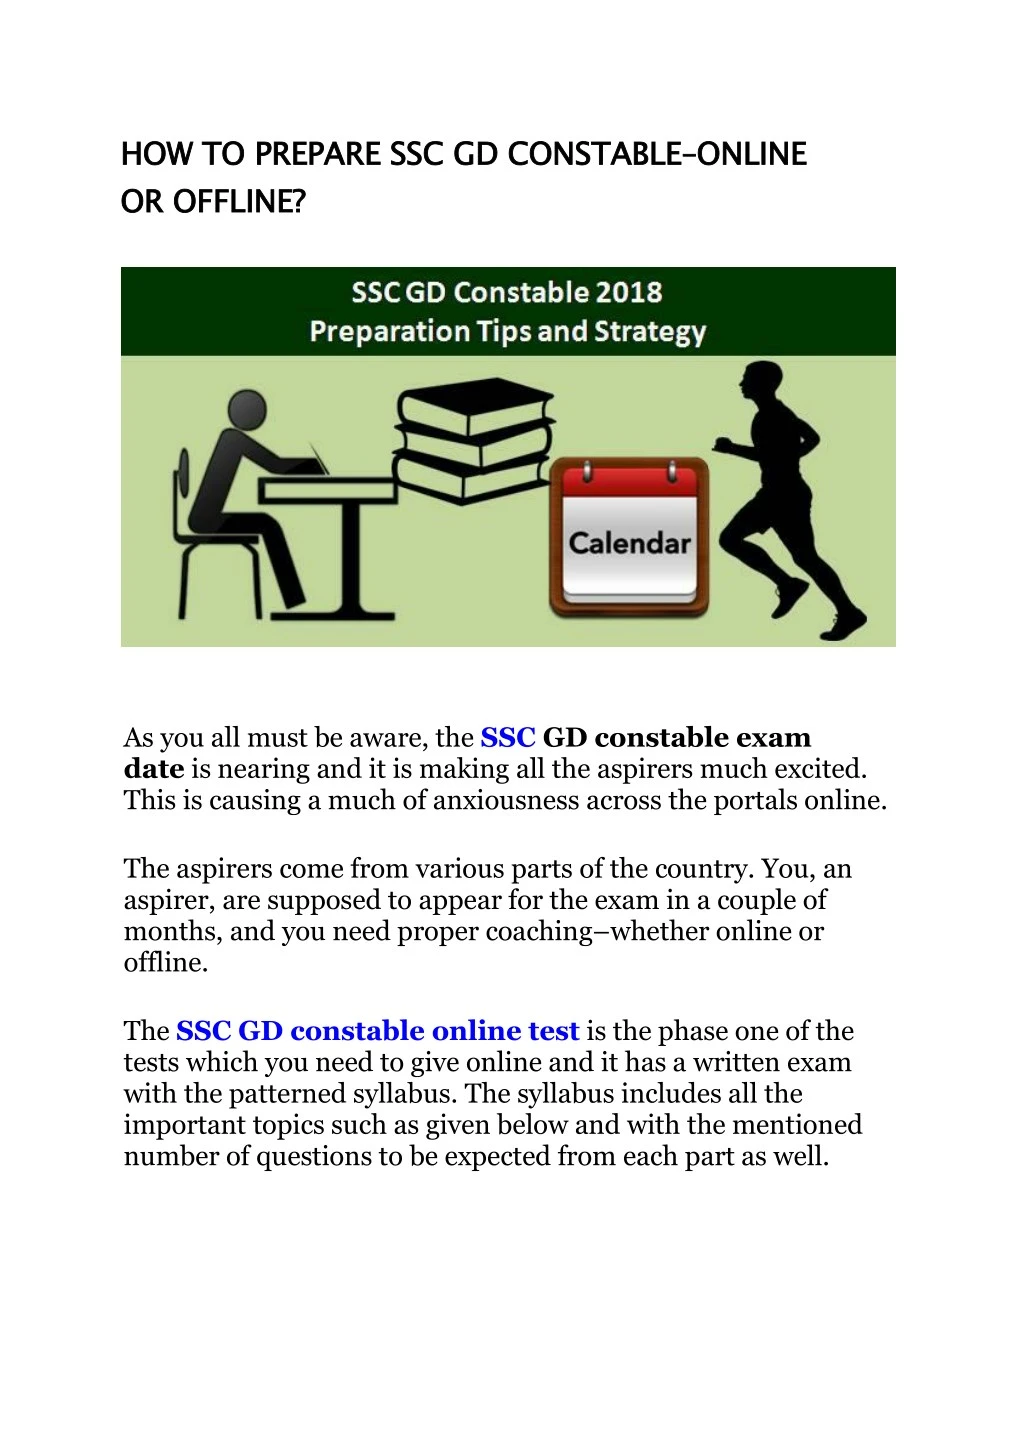 how to prepare ssc gd constable or